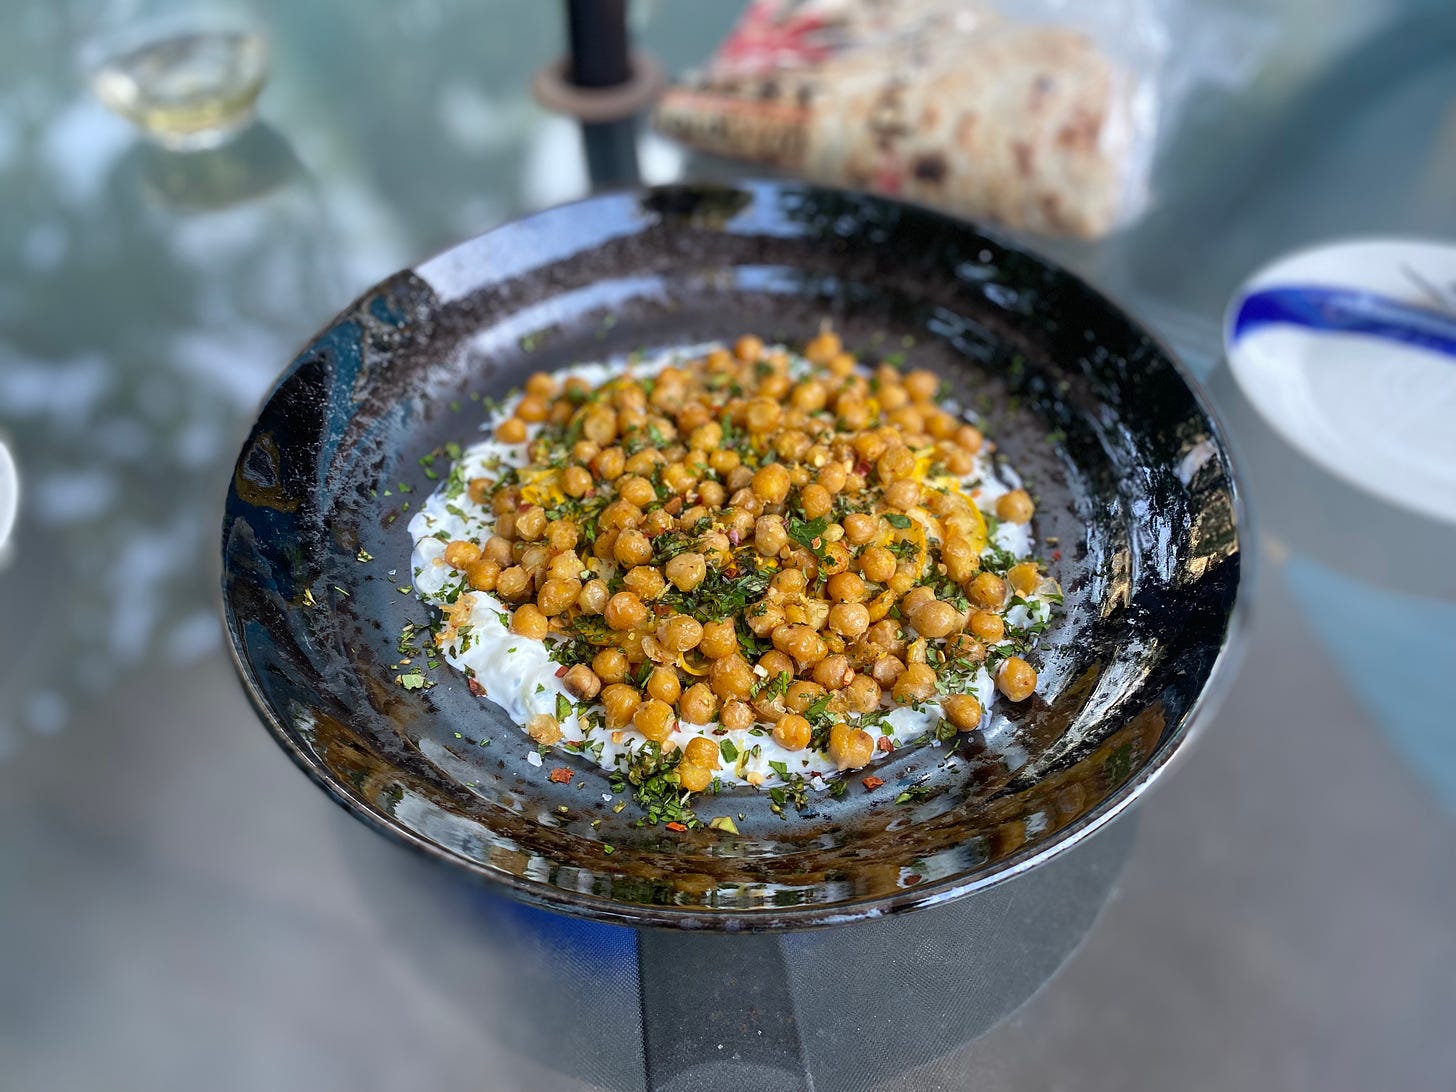 A shallow black bowl of tzatziki and crispy chickpeas sprinkled with herbs and chilies. The yellow zucchini is beneath the chickpeas, but it's almost entirely hidden or blends in with the colour of the chickpeas. In the background is a small white plate with a blue stripe, and a package of taftoon.